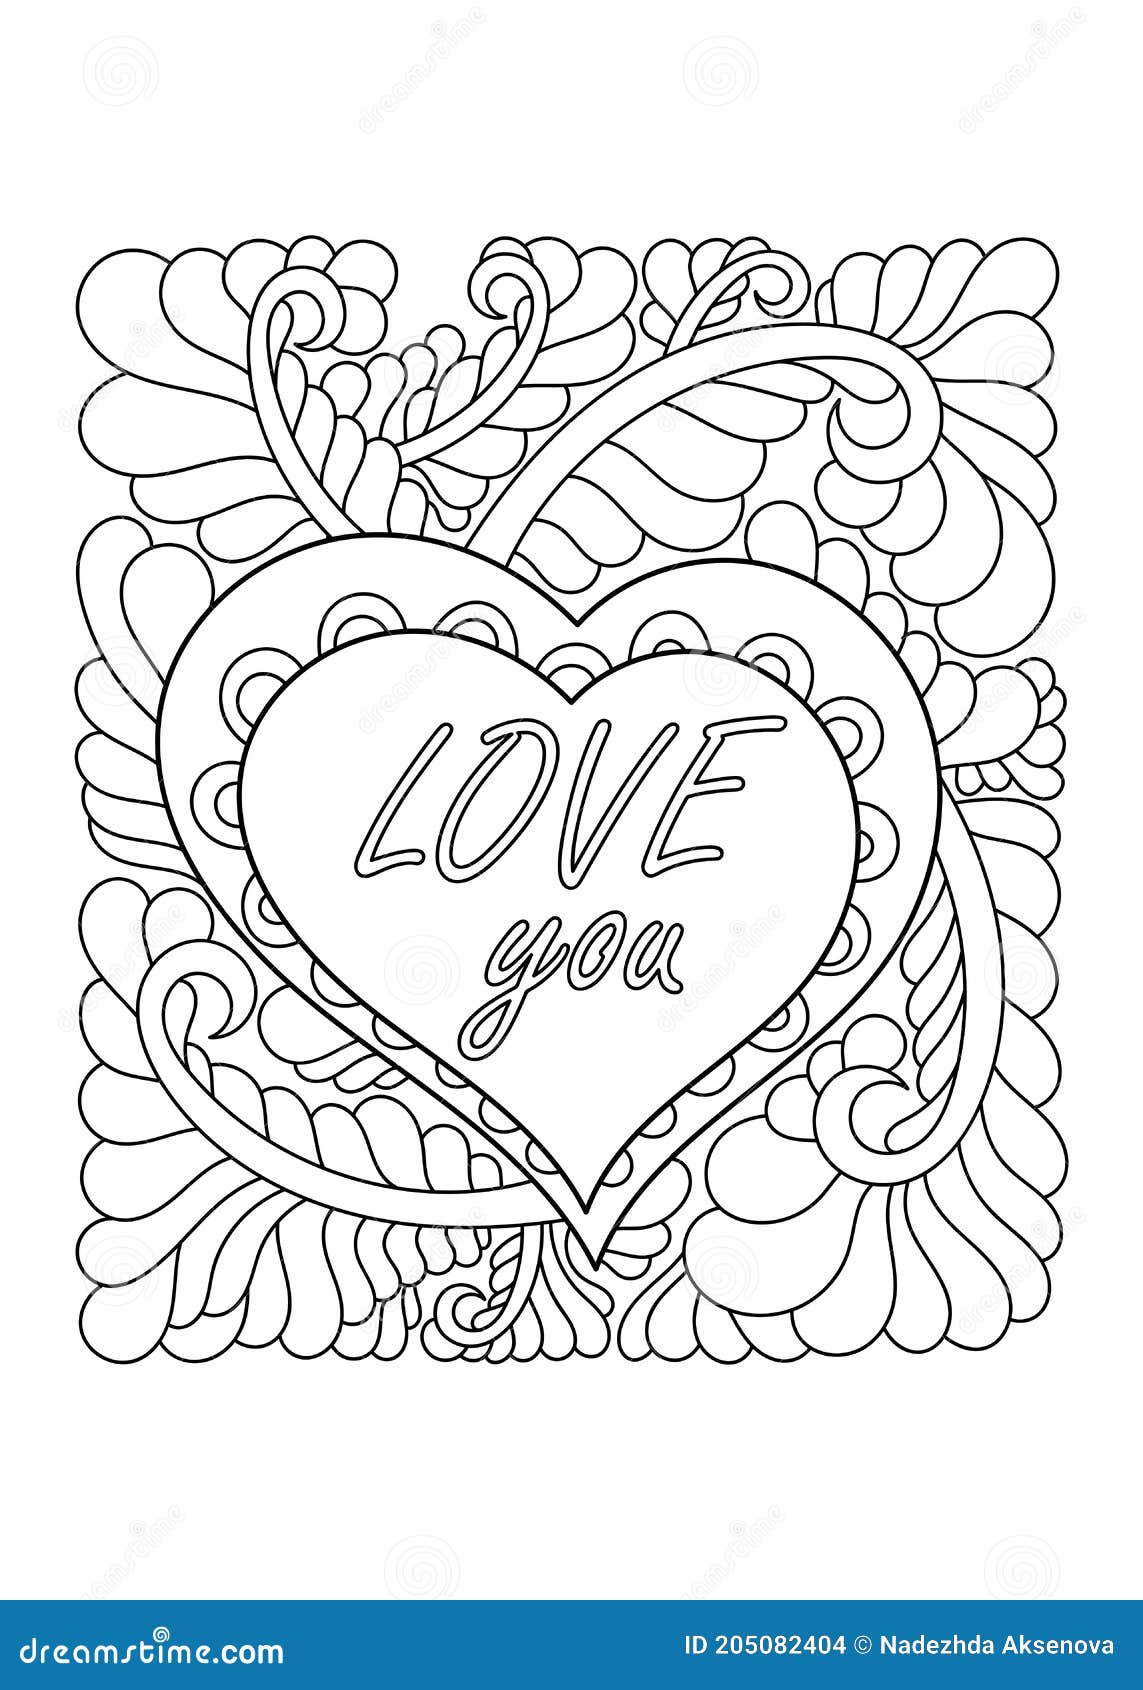 Coloring page heart st valentines day word love coloring book for children and adult decorative love frame with heart stock illustration